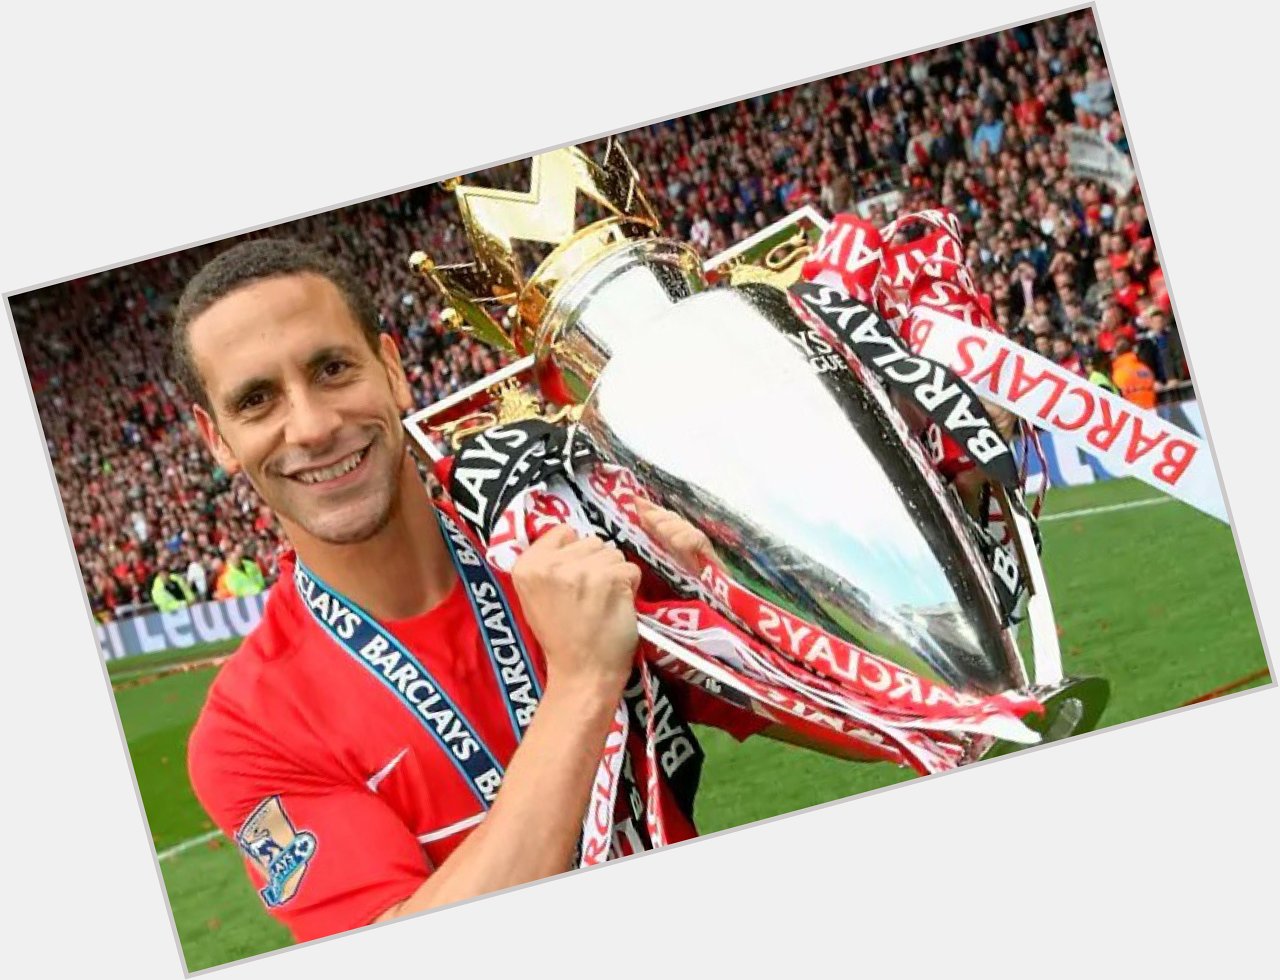 Happy birthday to Rio Ferdinand. The Manchester United and England legend turns 39 today. 